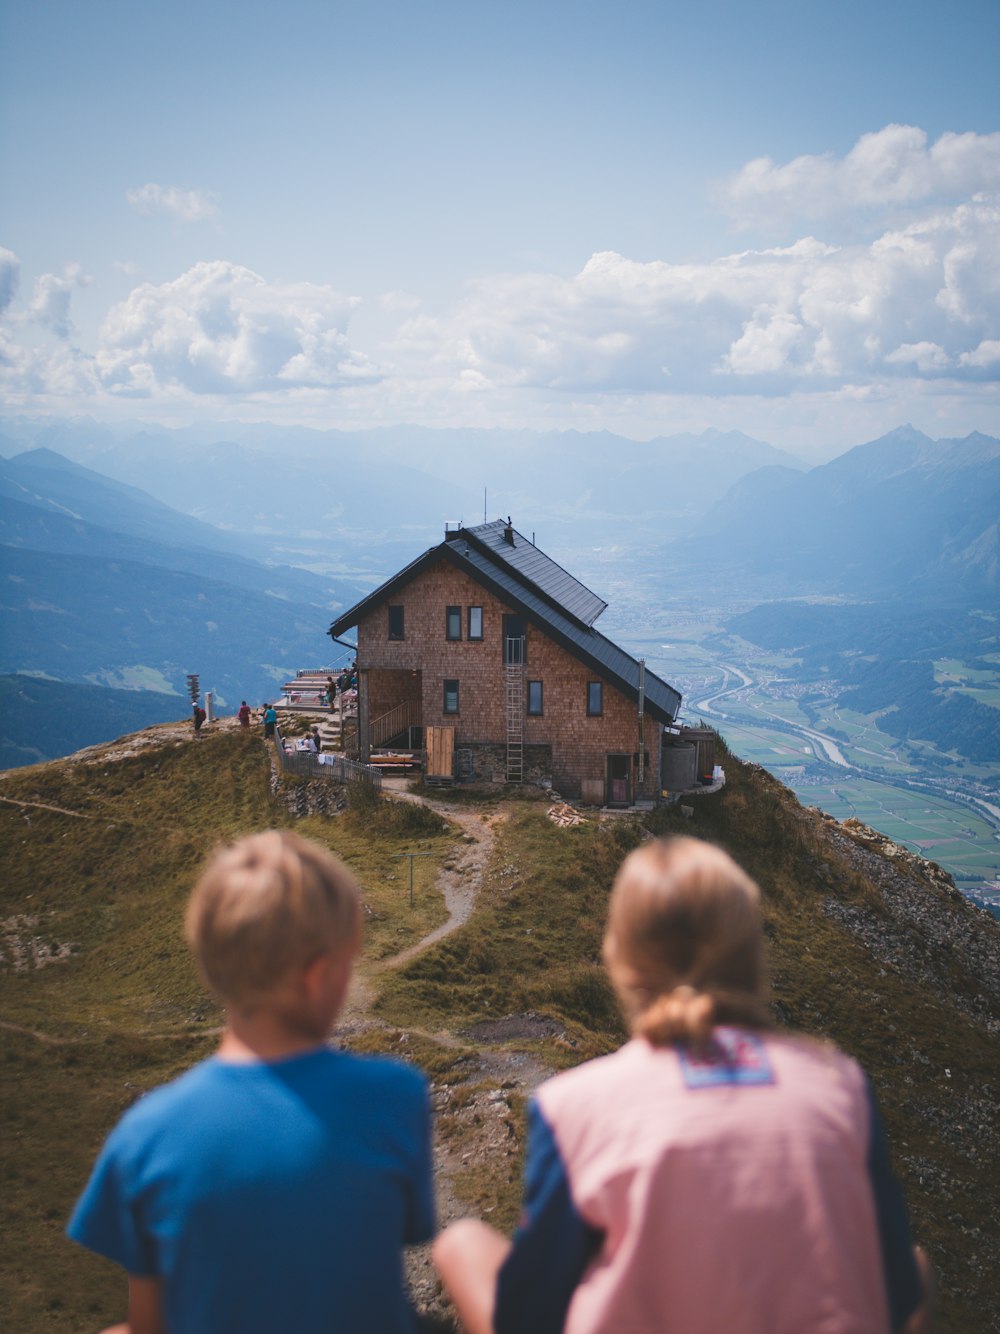 boy and girl sitting on cliff overlooking house at daytime